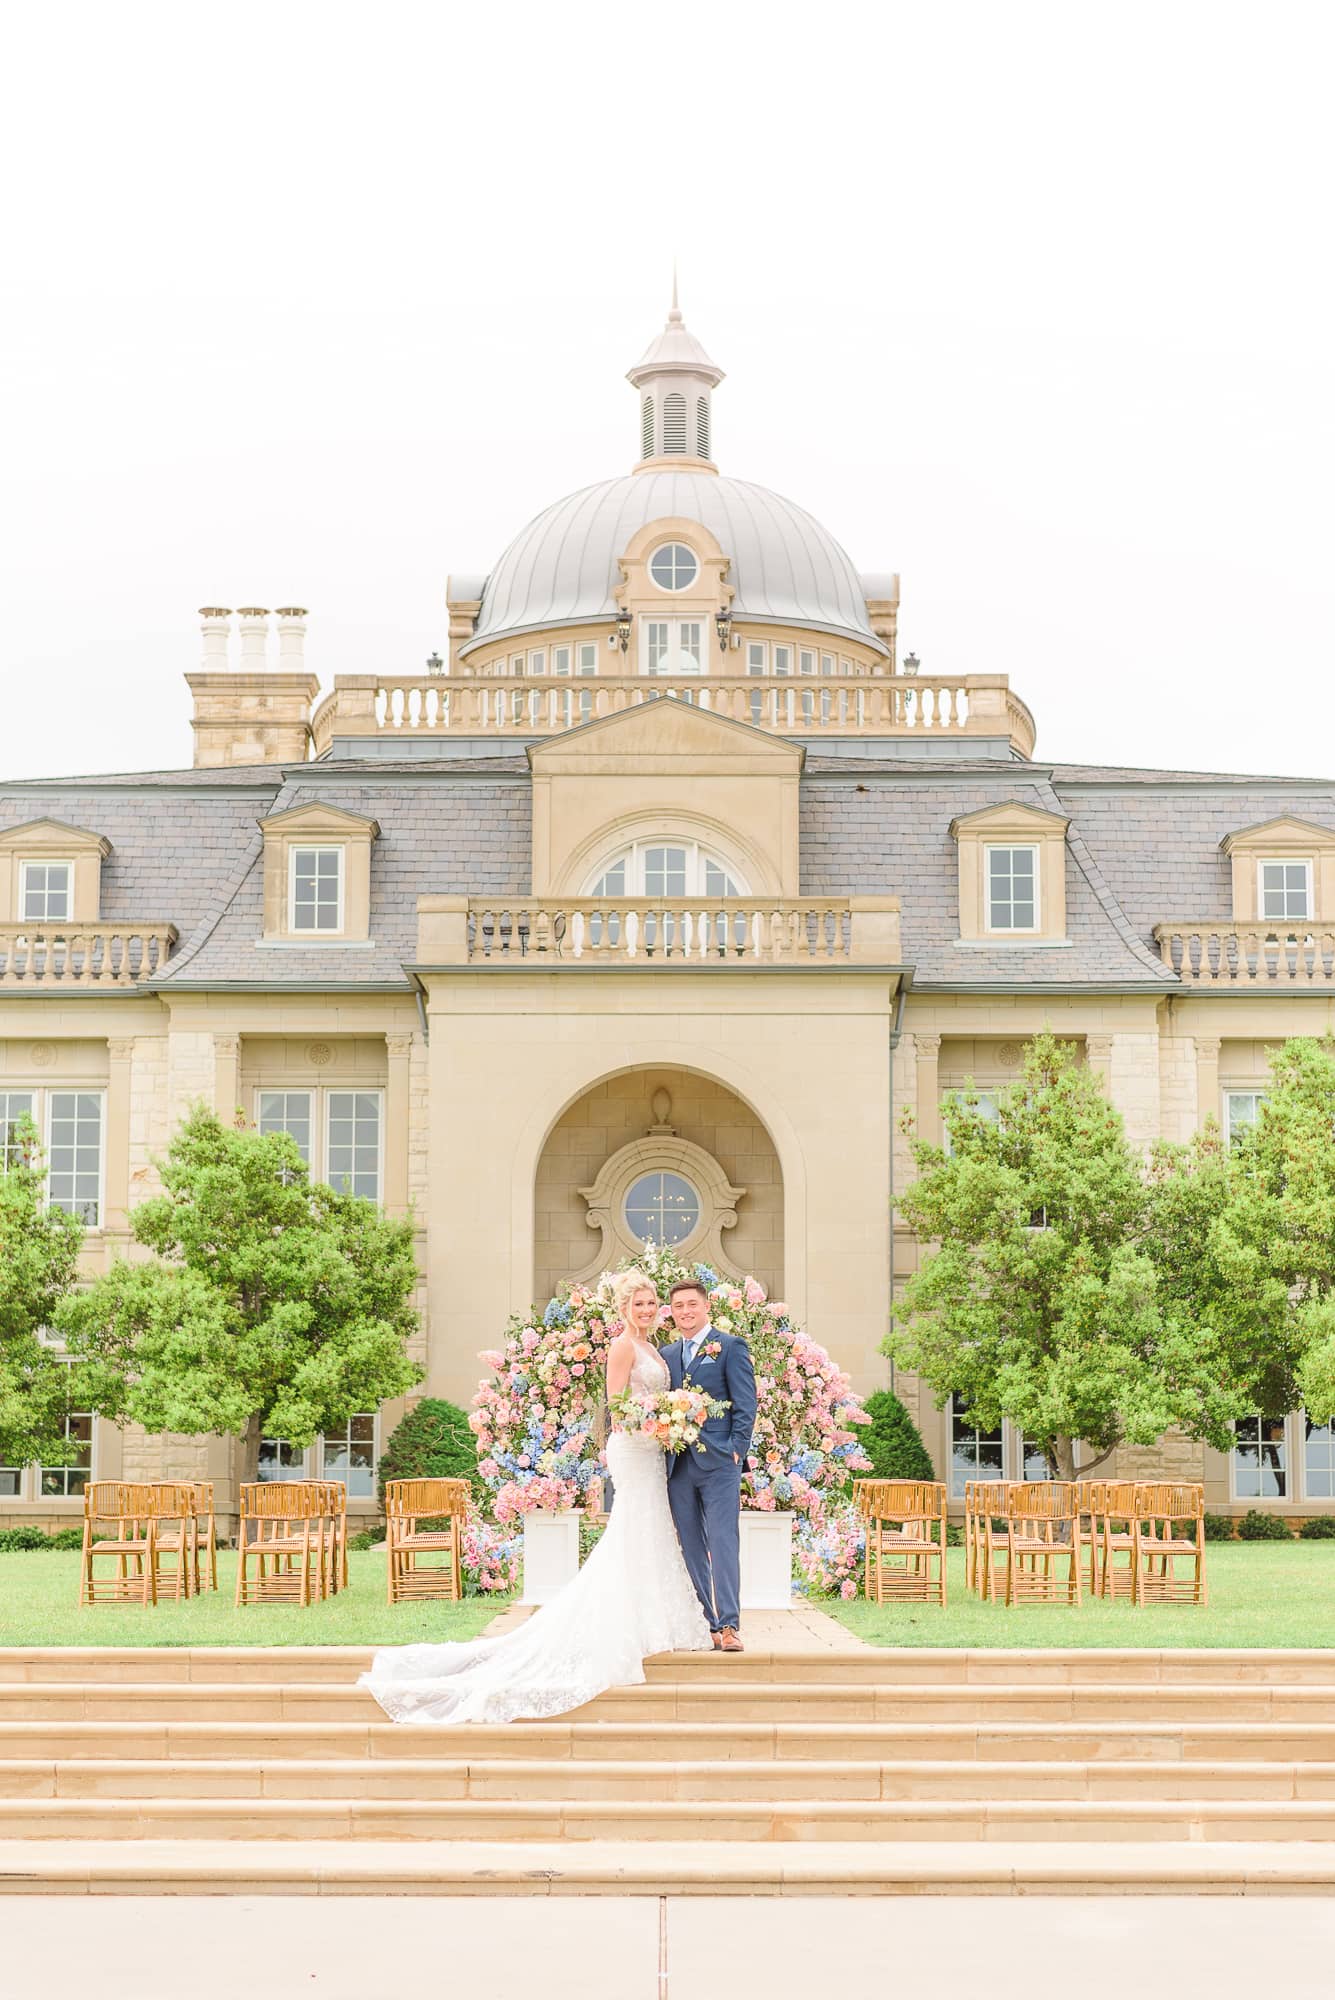 The bride and groom are surrounded by summer colors as they stand in front of their wedding venue.